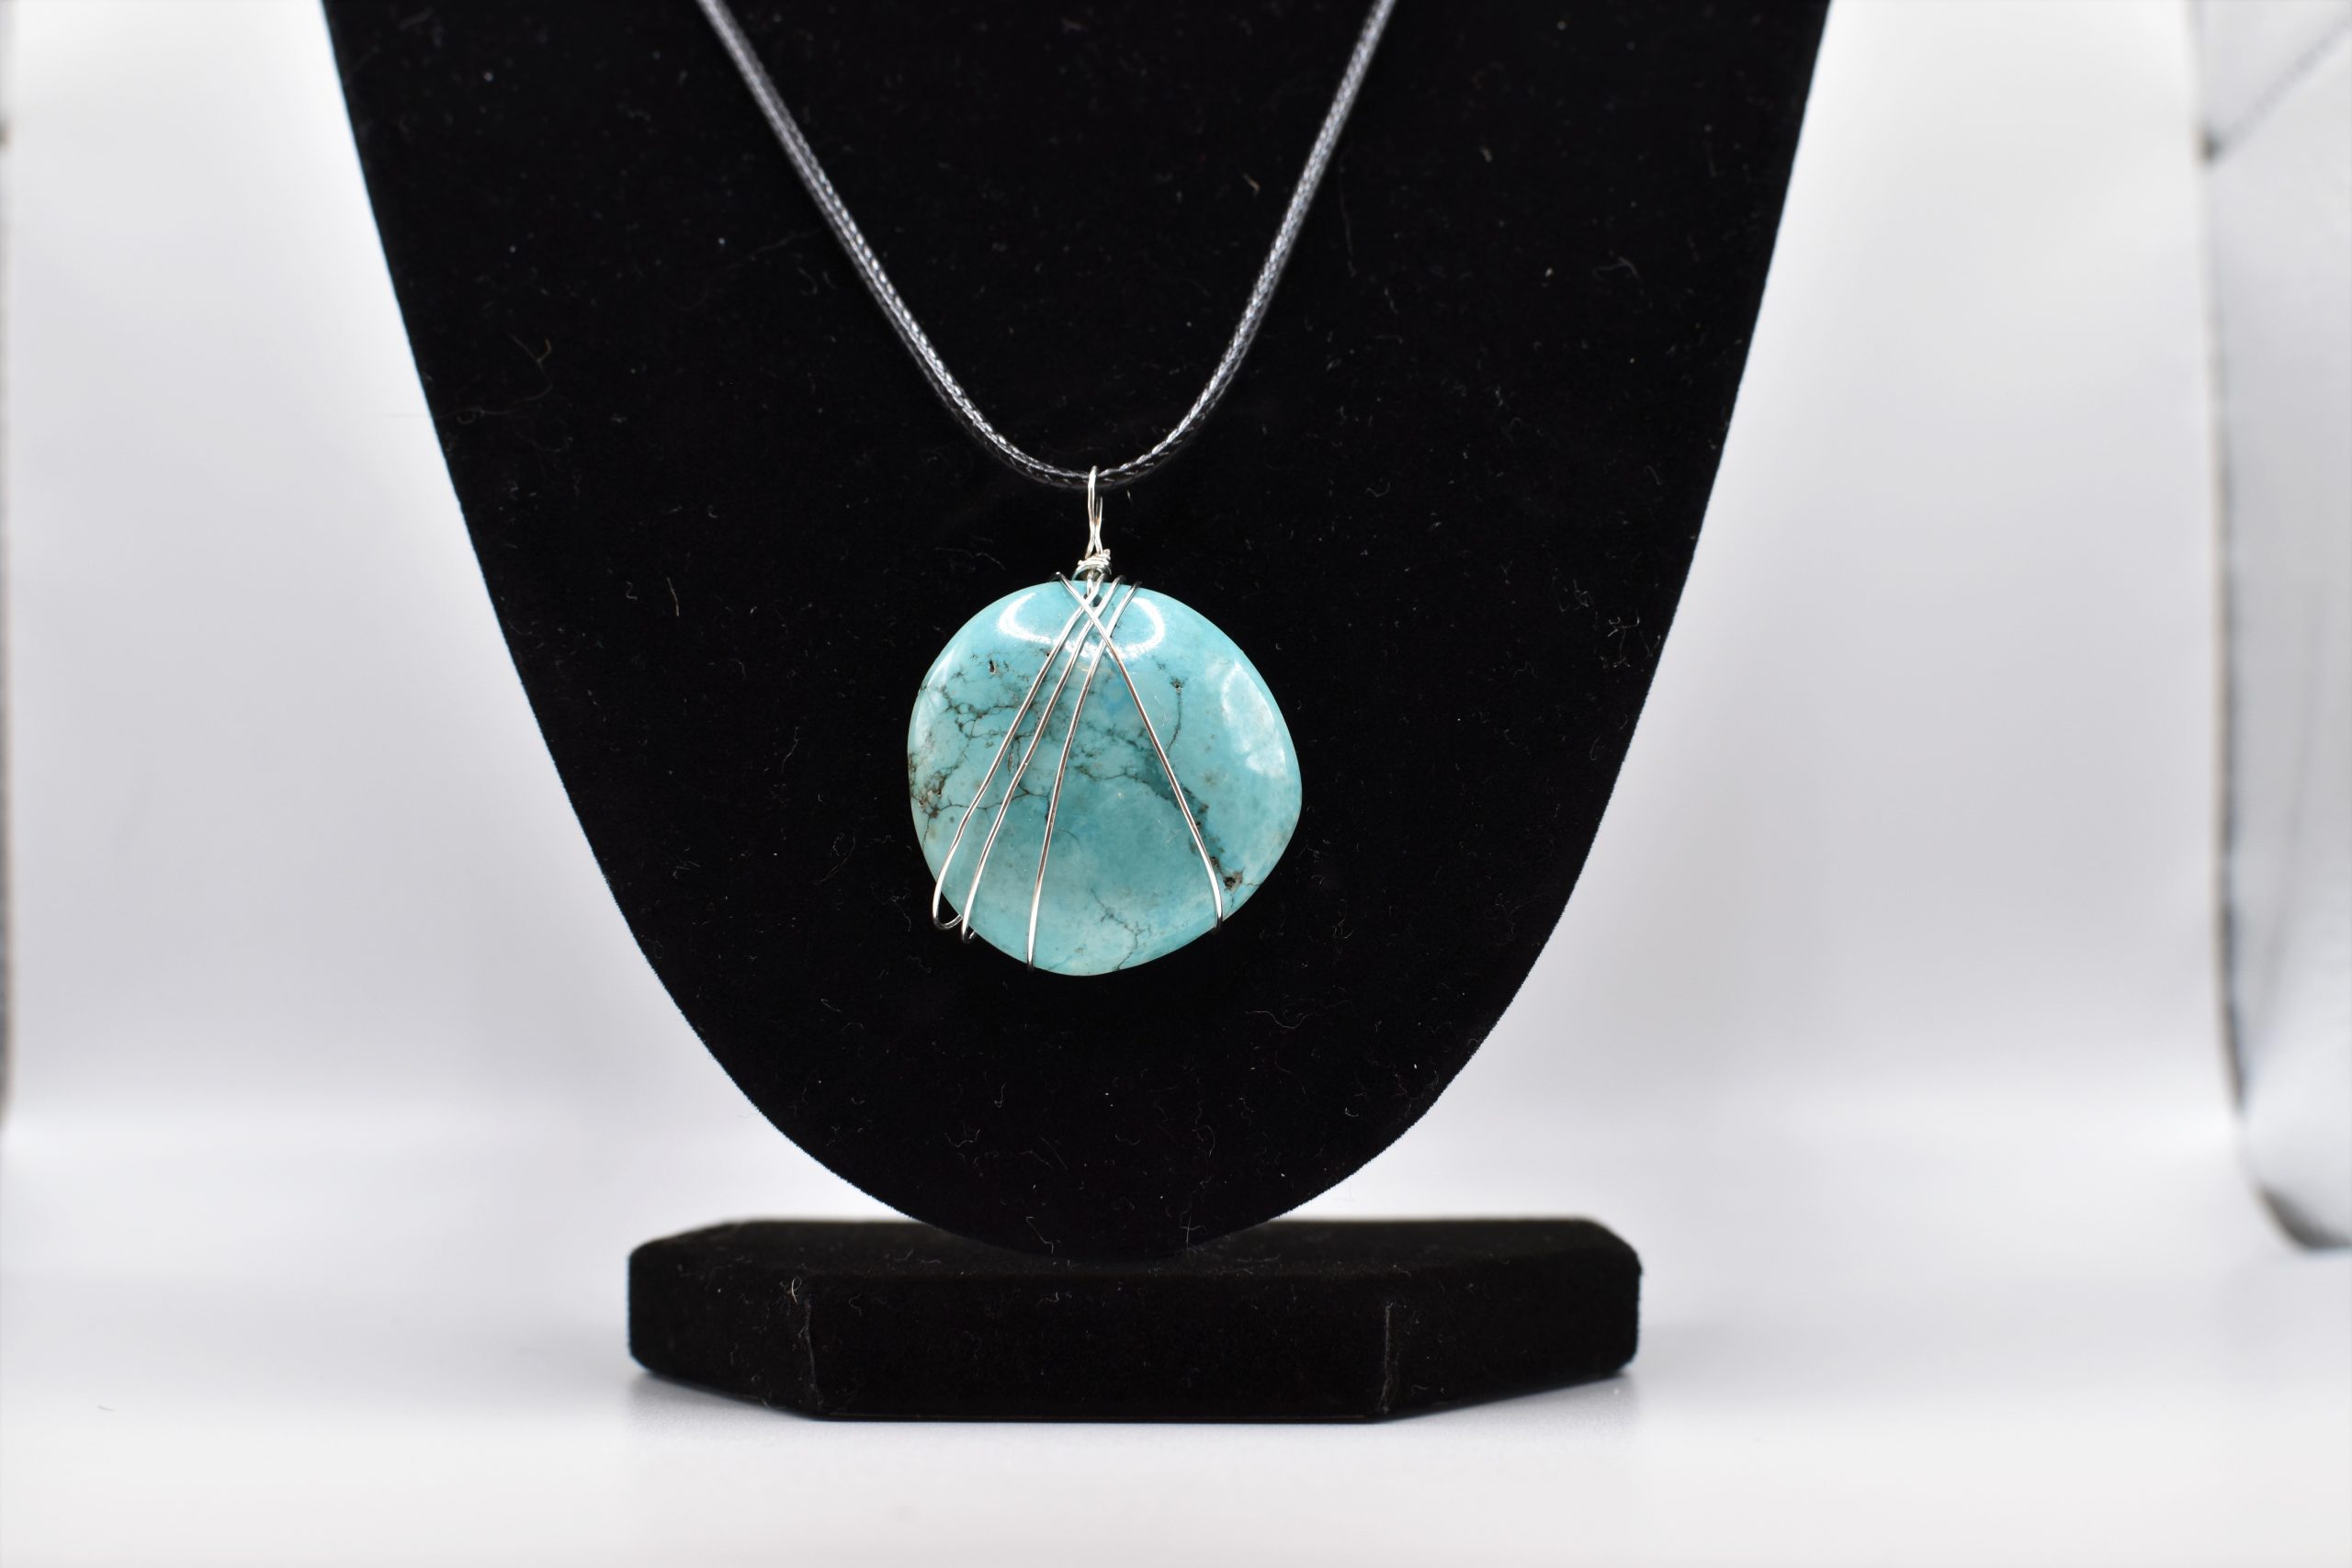 magnesite necklace wrapped simply in sterling silver wire and hung on a black rope necklace